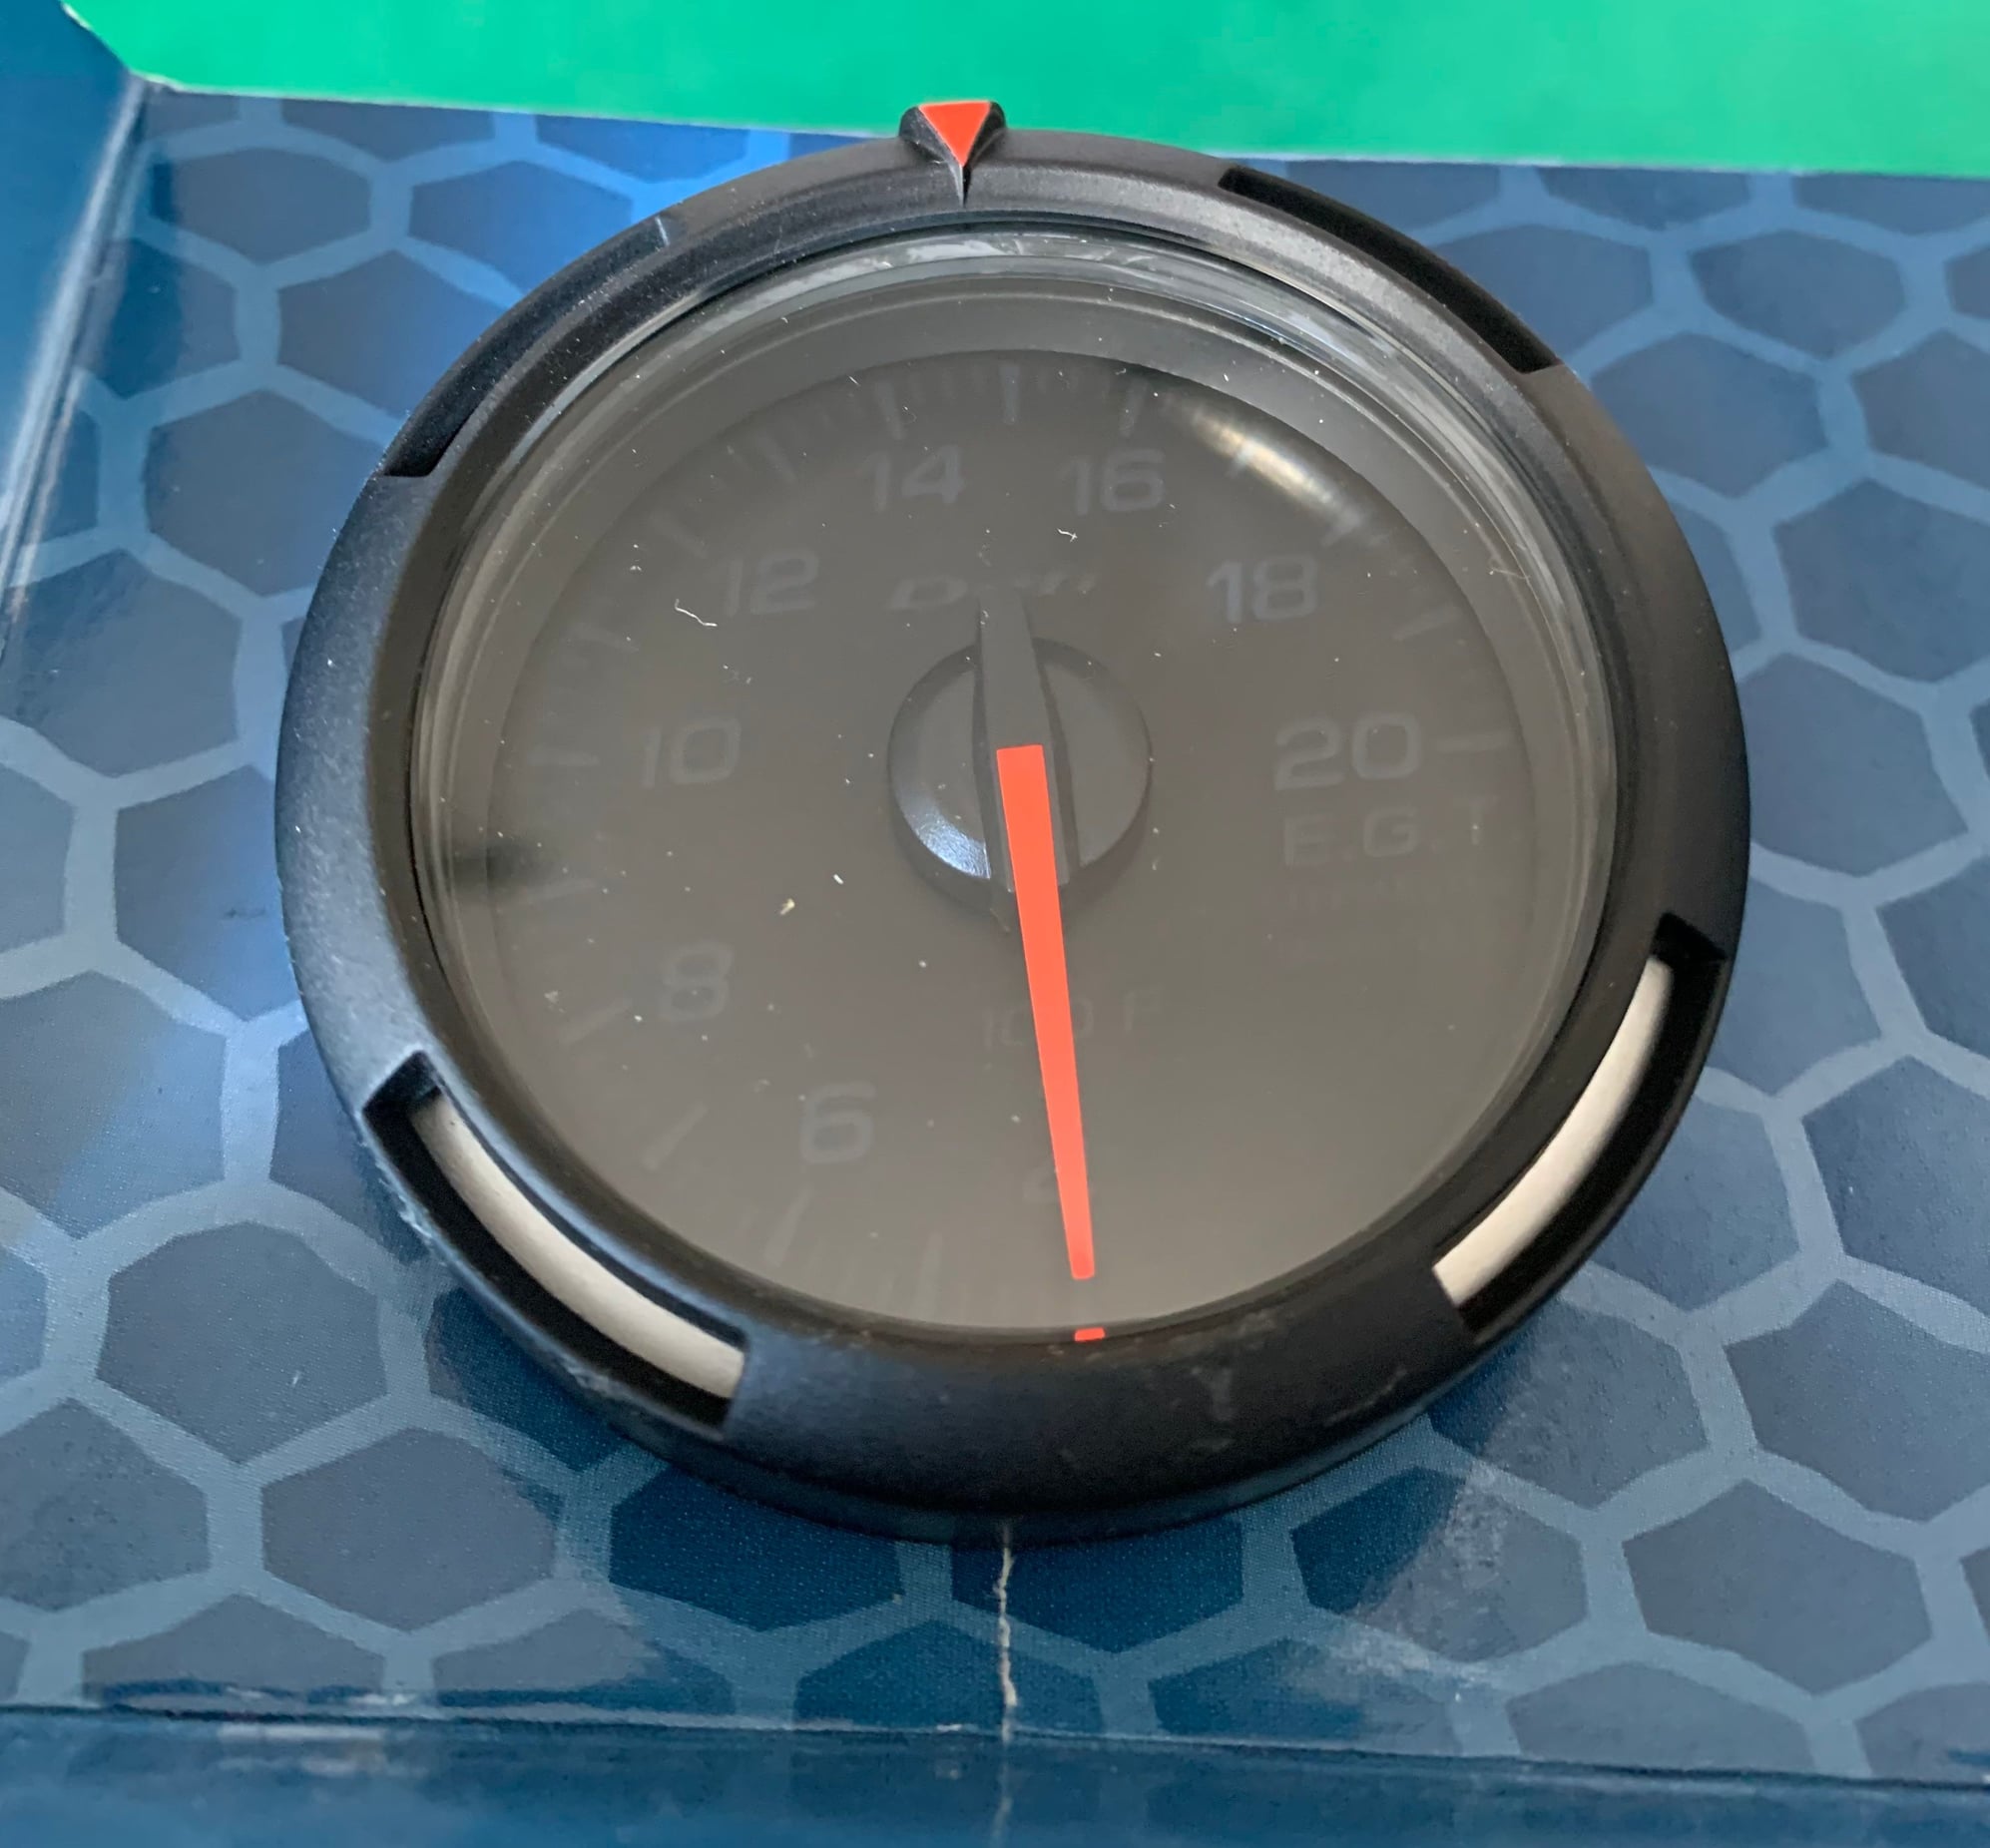 Audio Video/Electronics - Defi Red Racer EGT Gauge 52mm - New - All Years Any Make All Models - Providence, RI 02860, United States